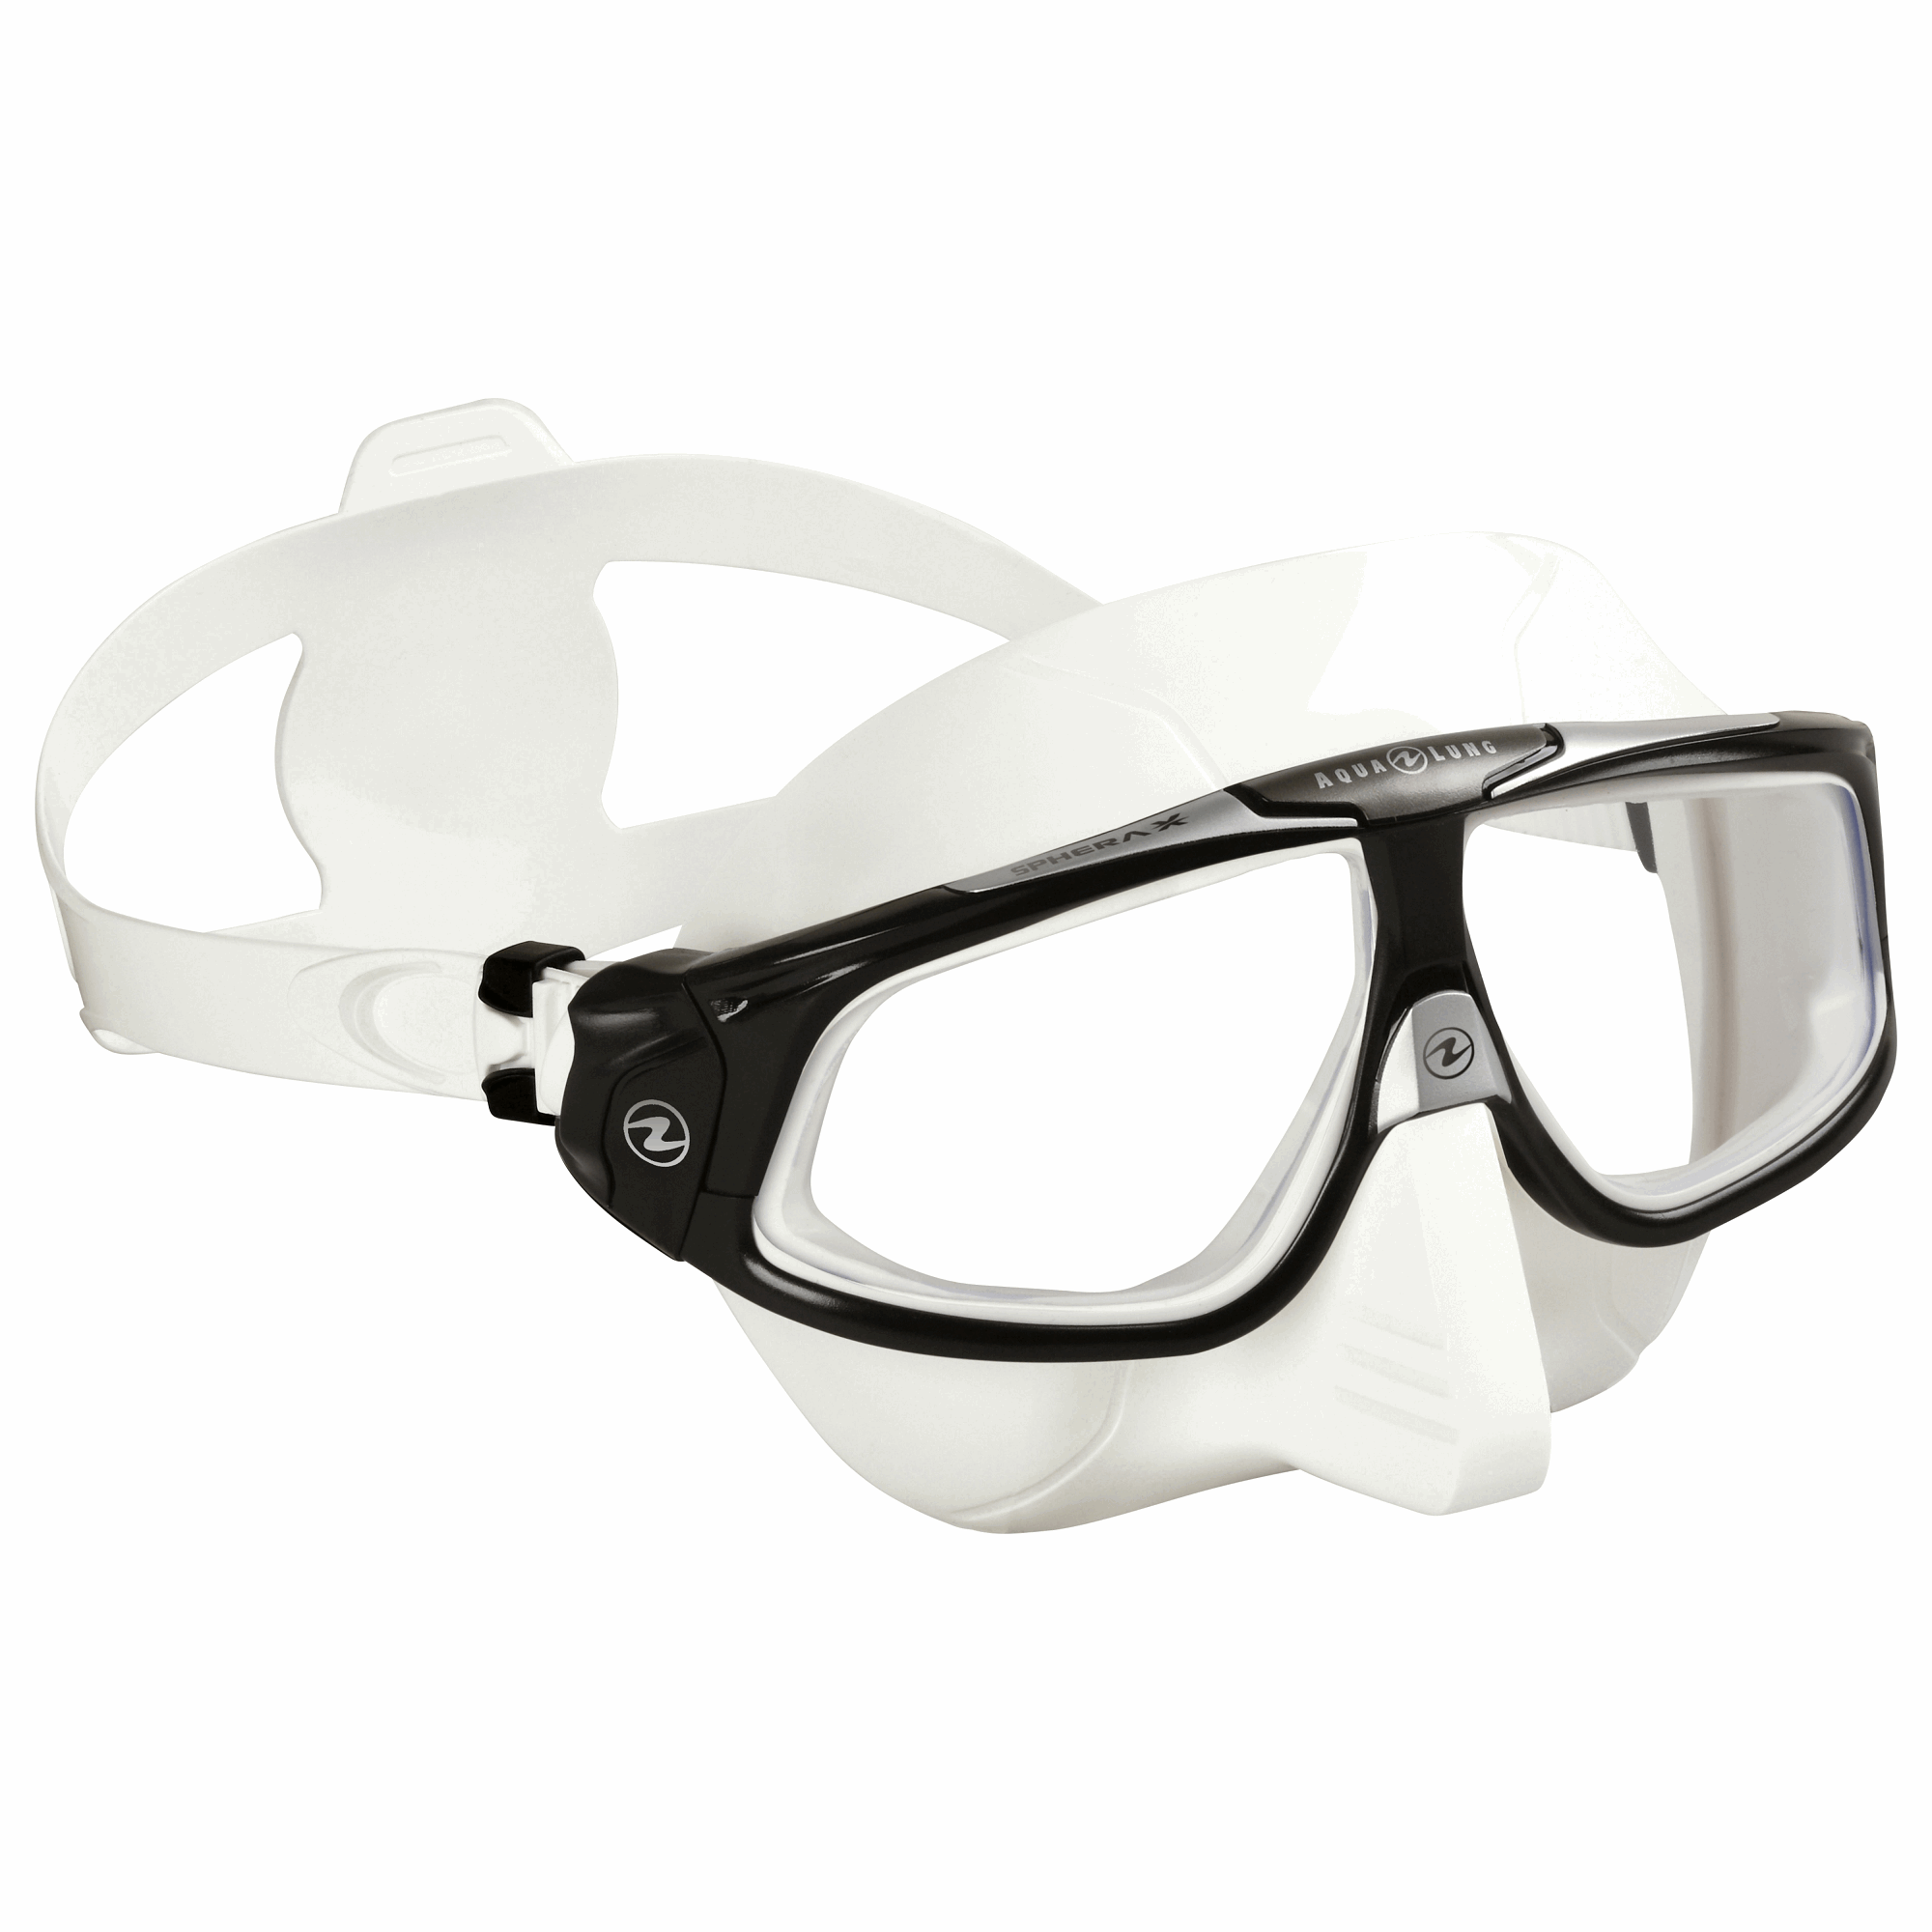 Aqualung Aqualung Sphera X Mask White Black - Oyster Diving